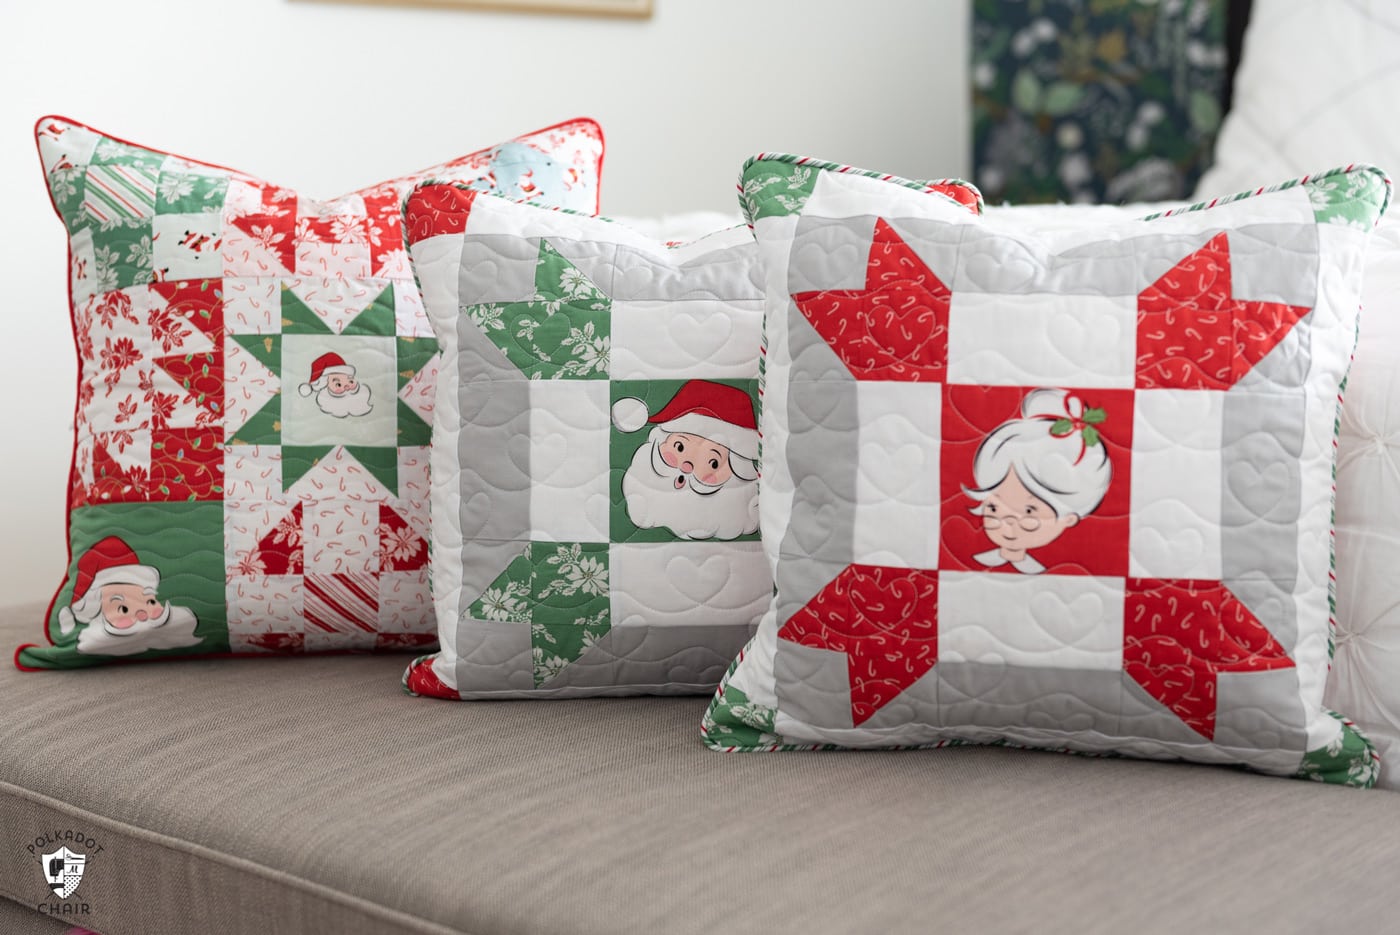 red, green and white patchwork christmas pillows on gray bench